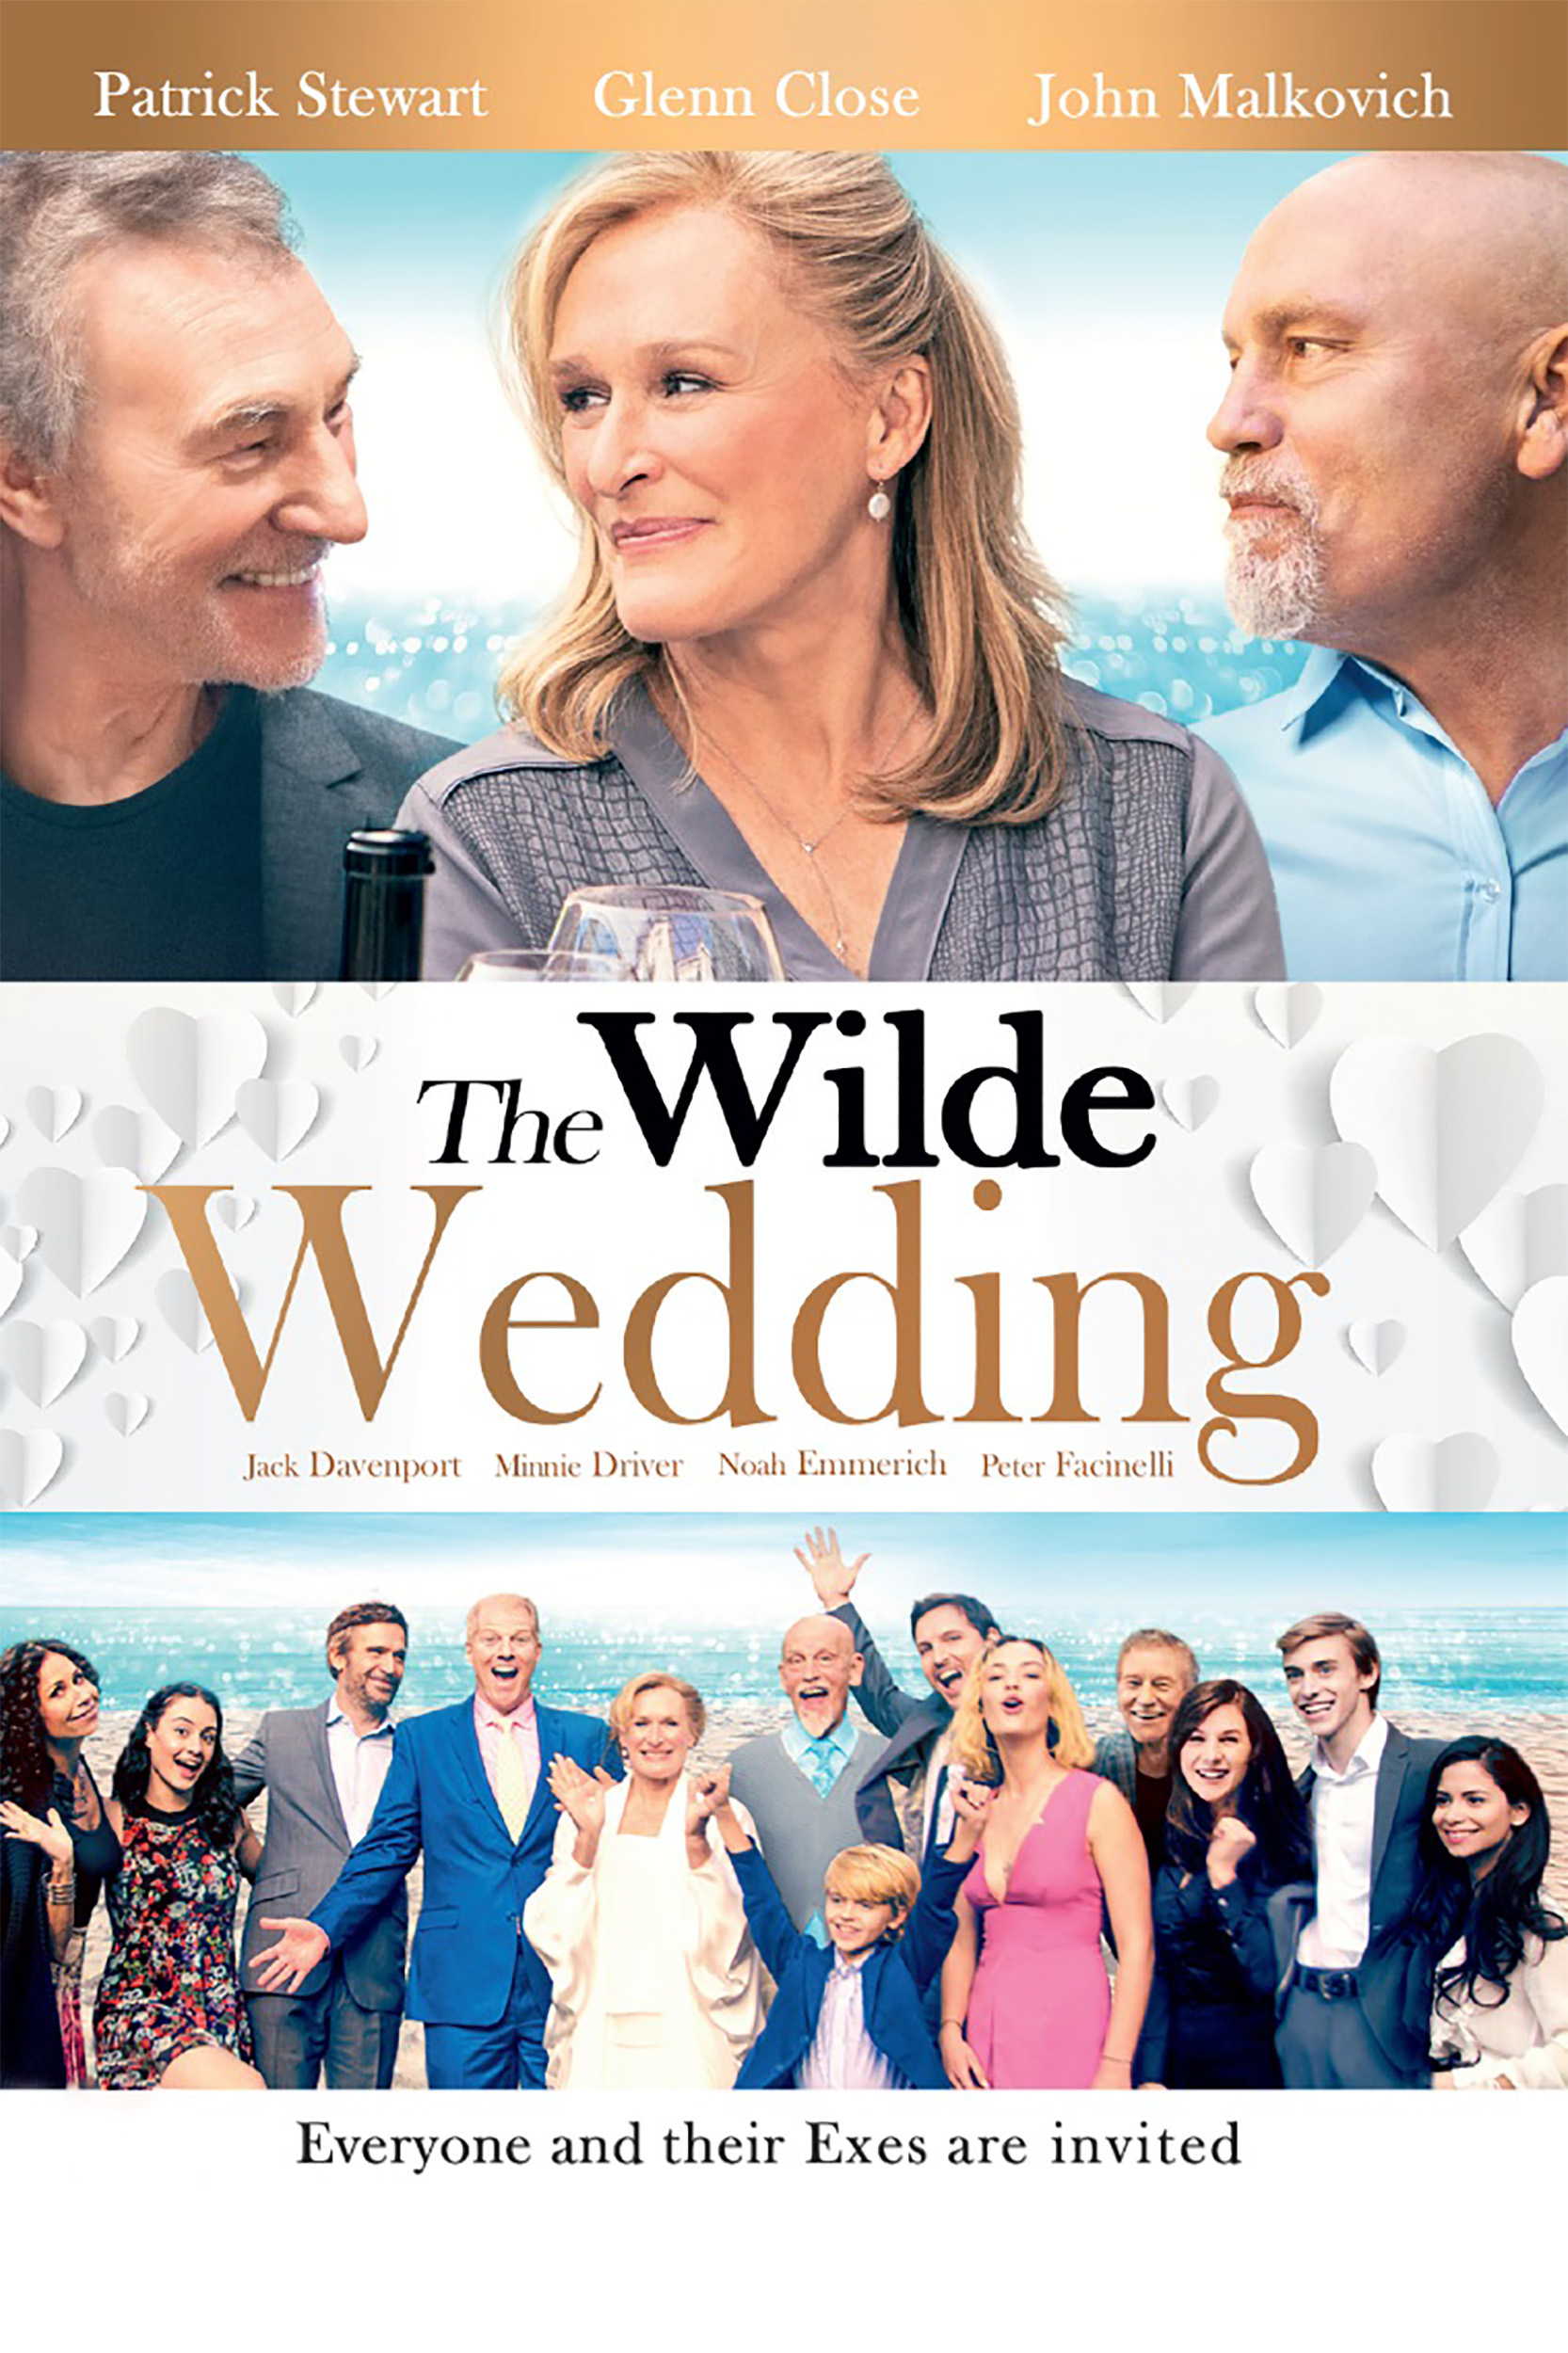 The Wilde Wedding - Where to Watch and Stream Online –